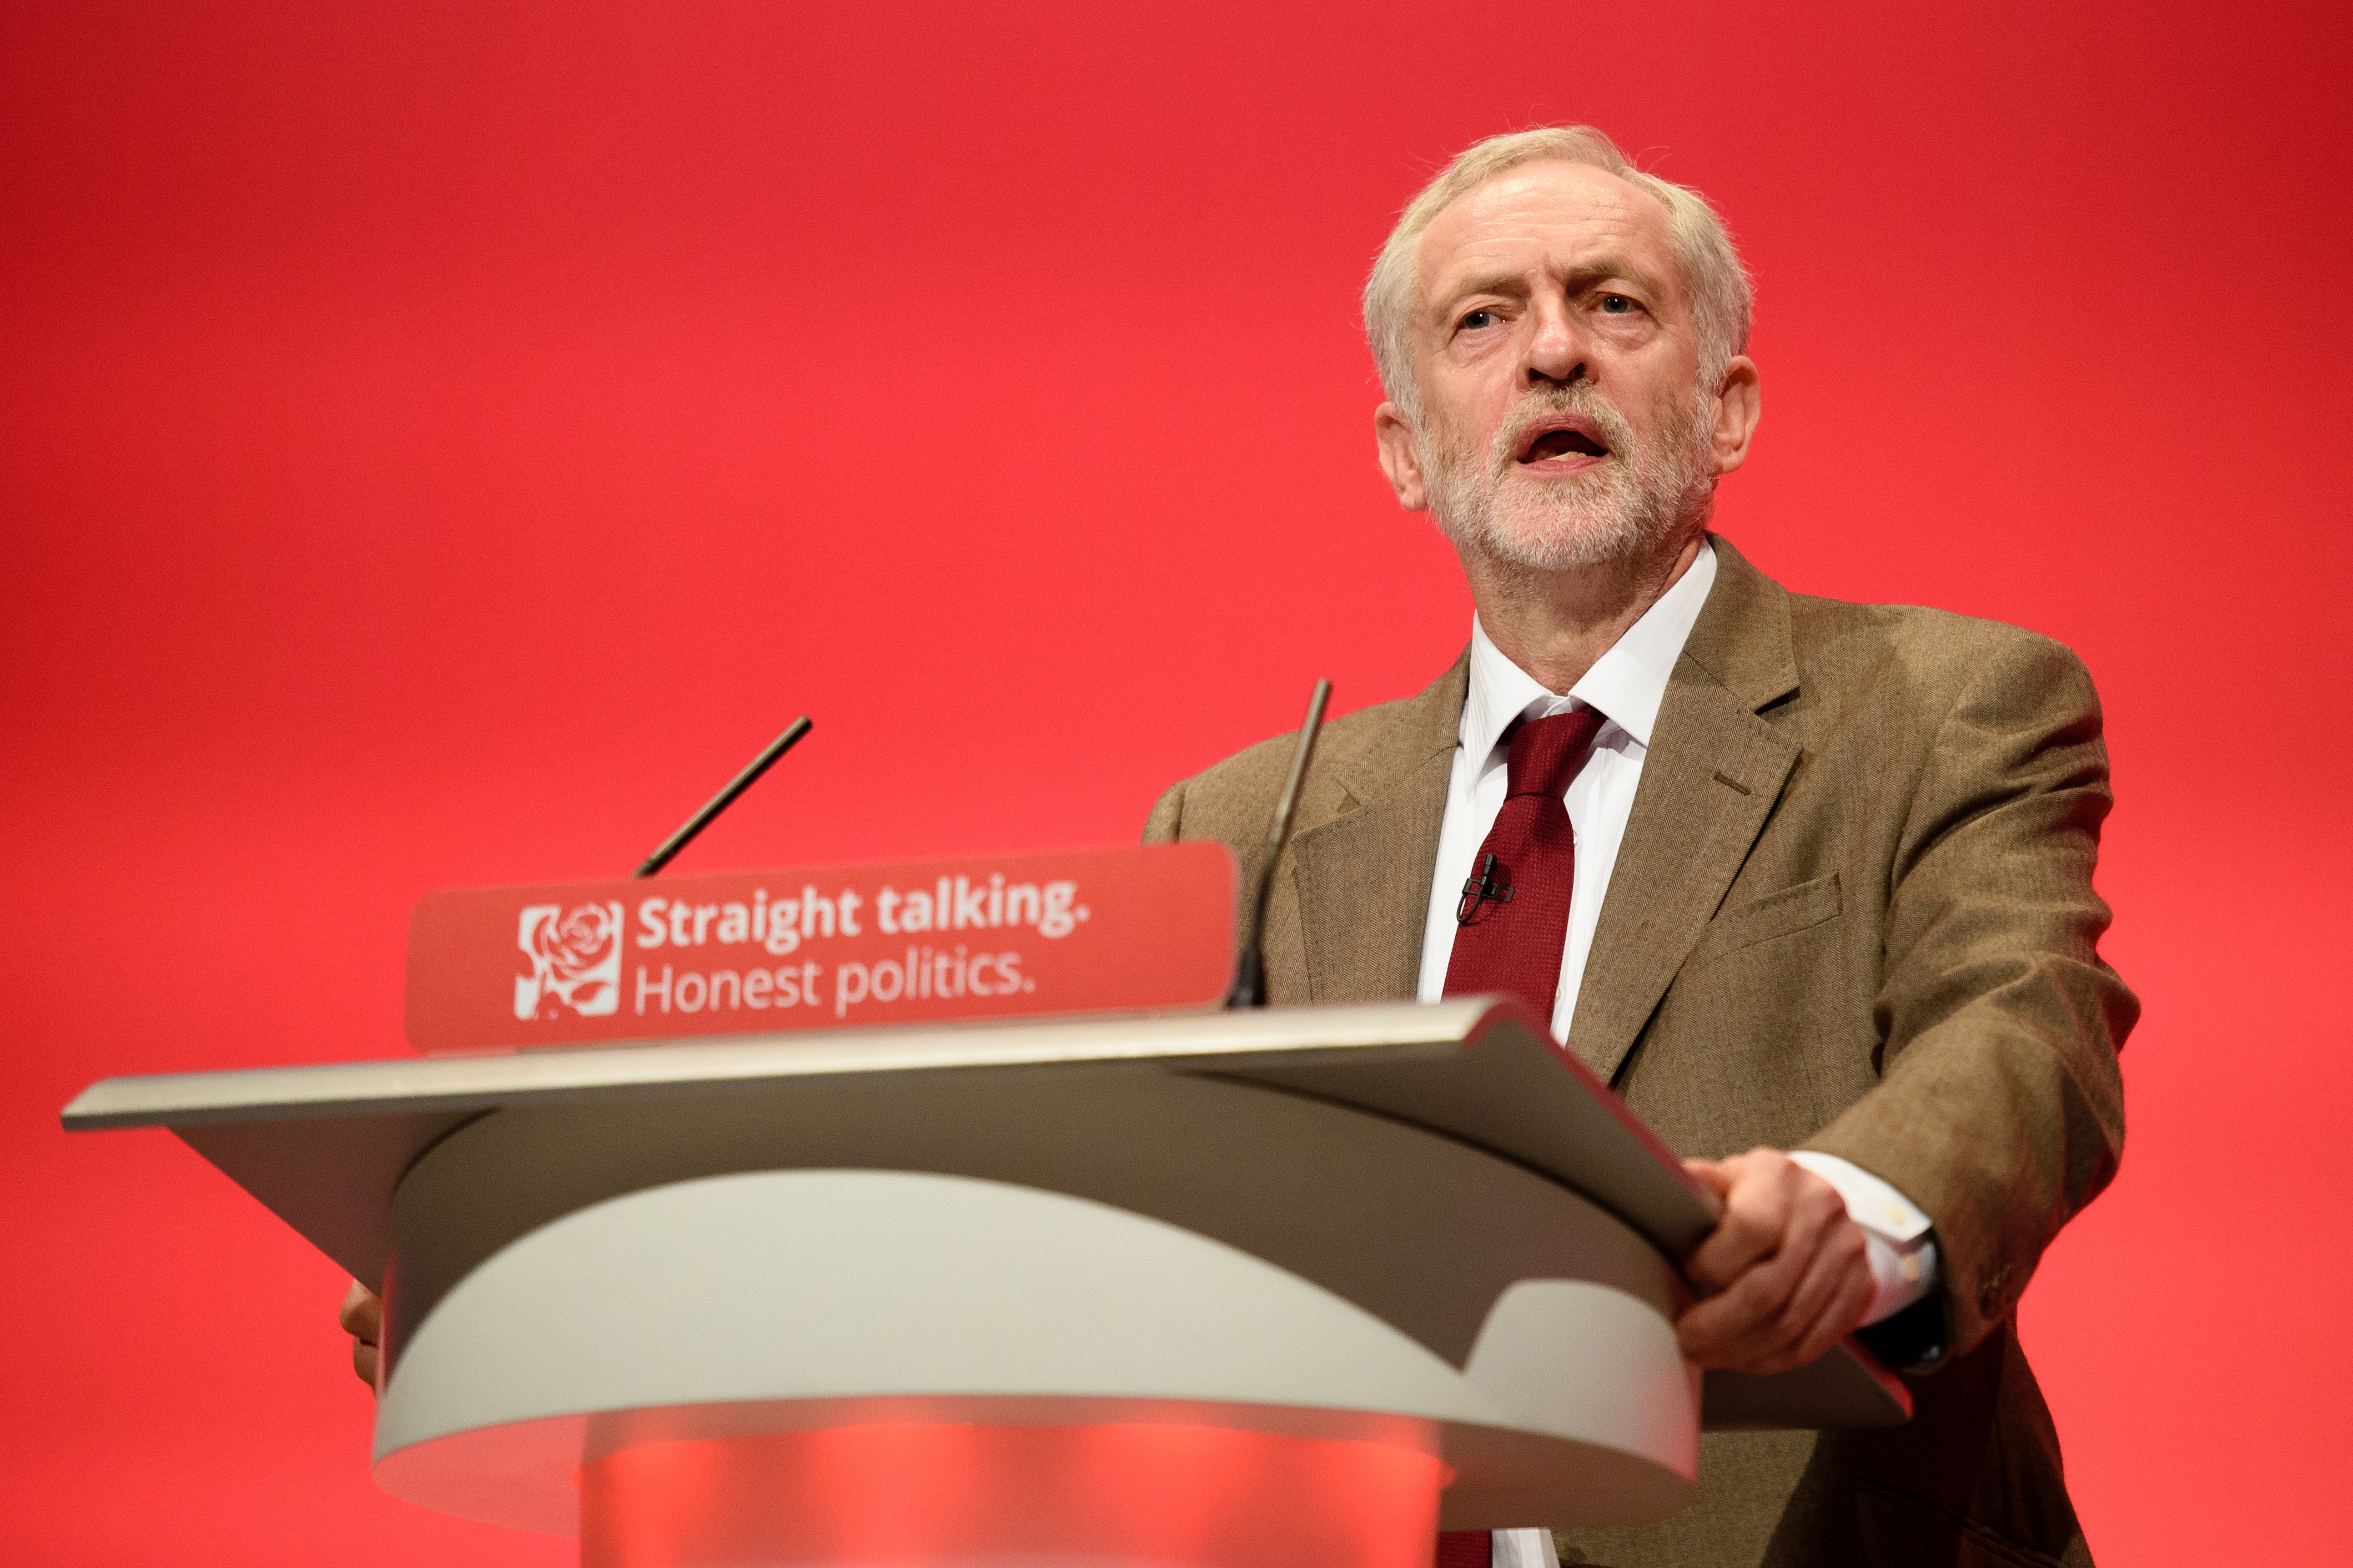 Jeremy Corbyn gives his first leader's speech at the Labour Party conference in 2015 (AFP)